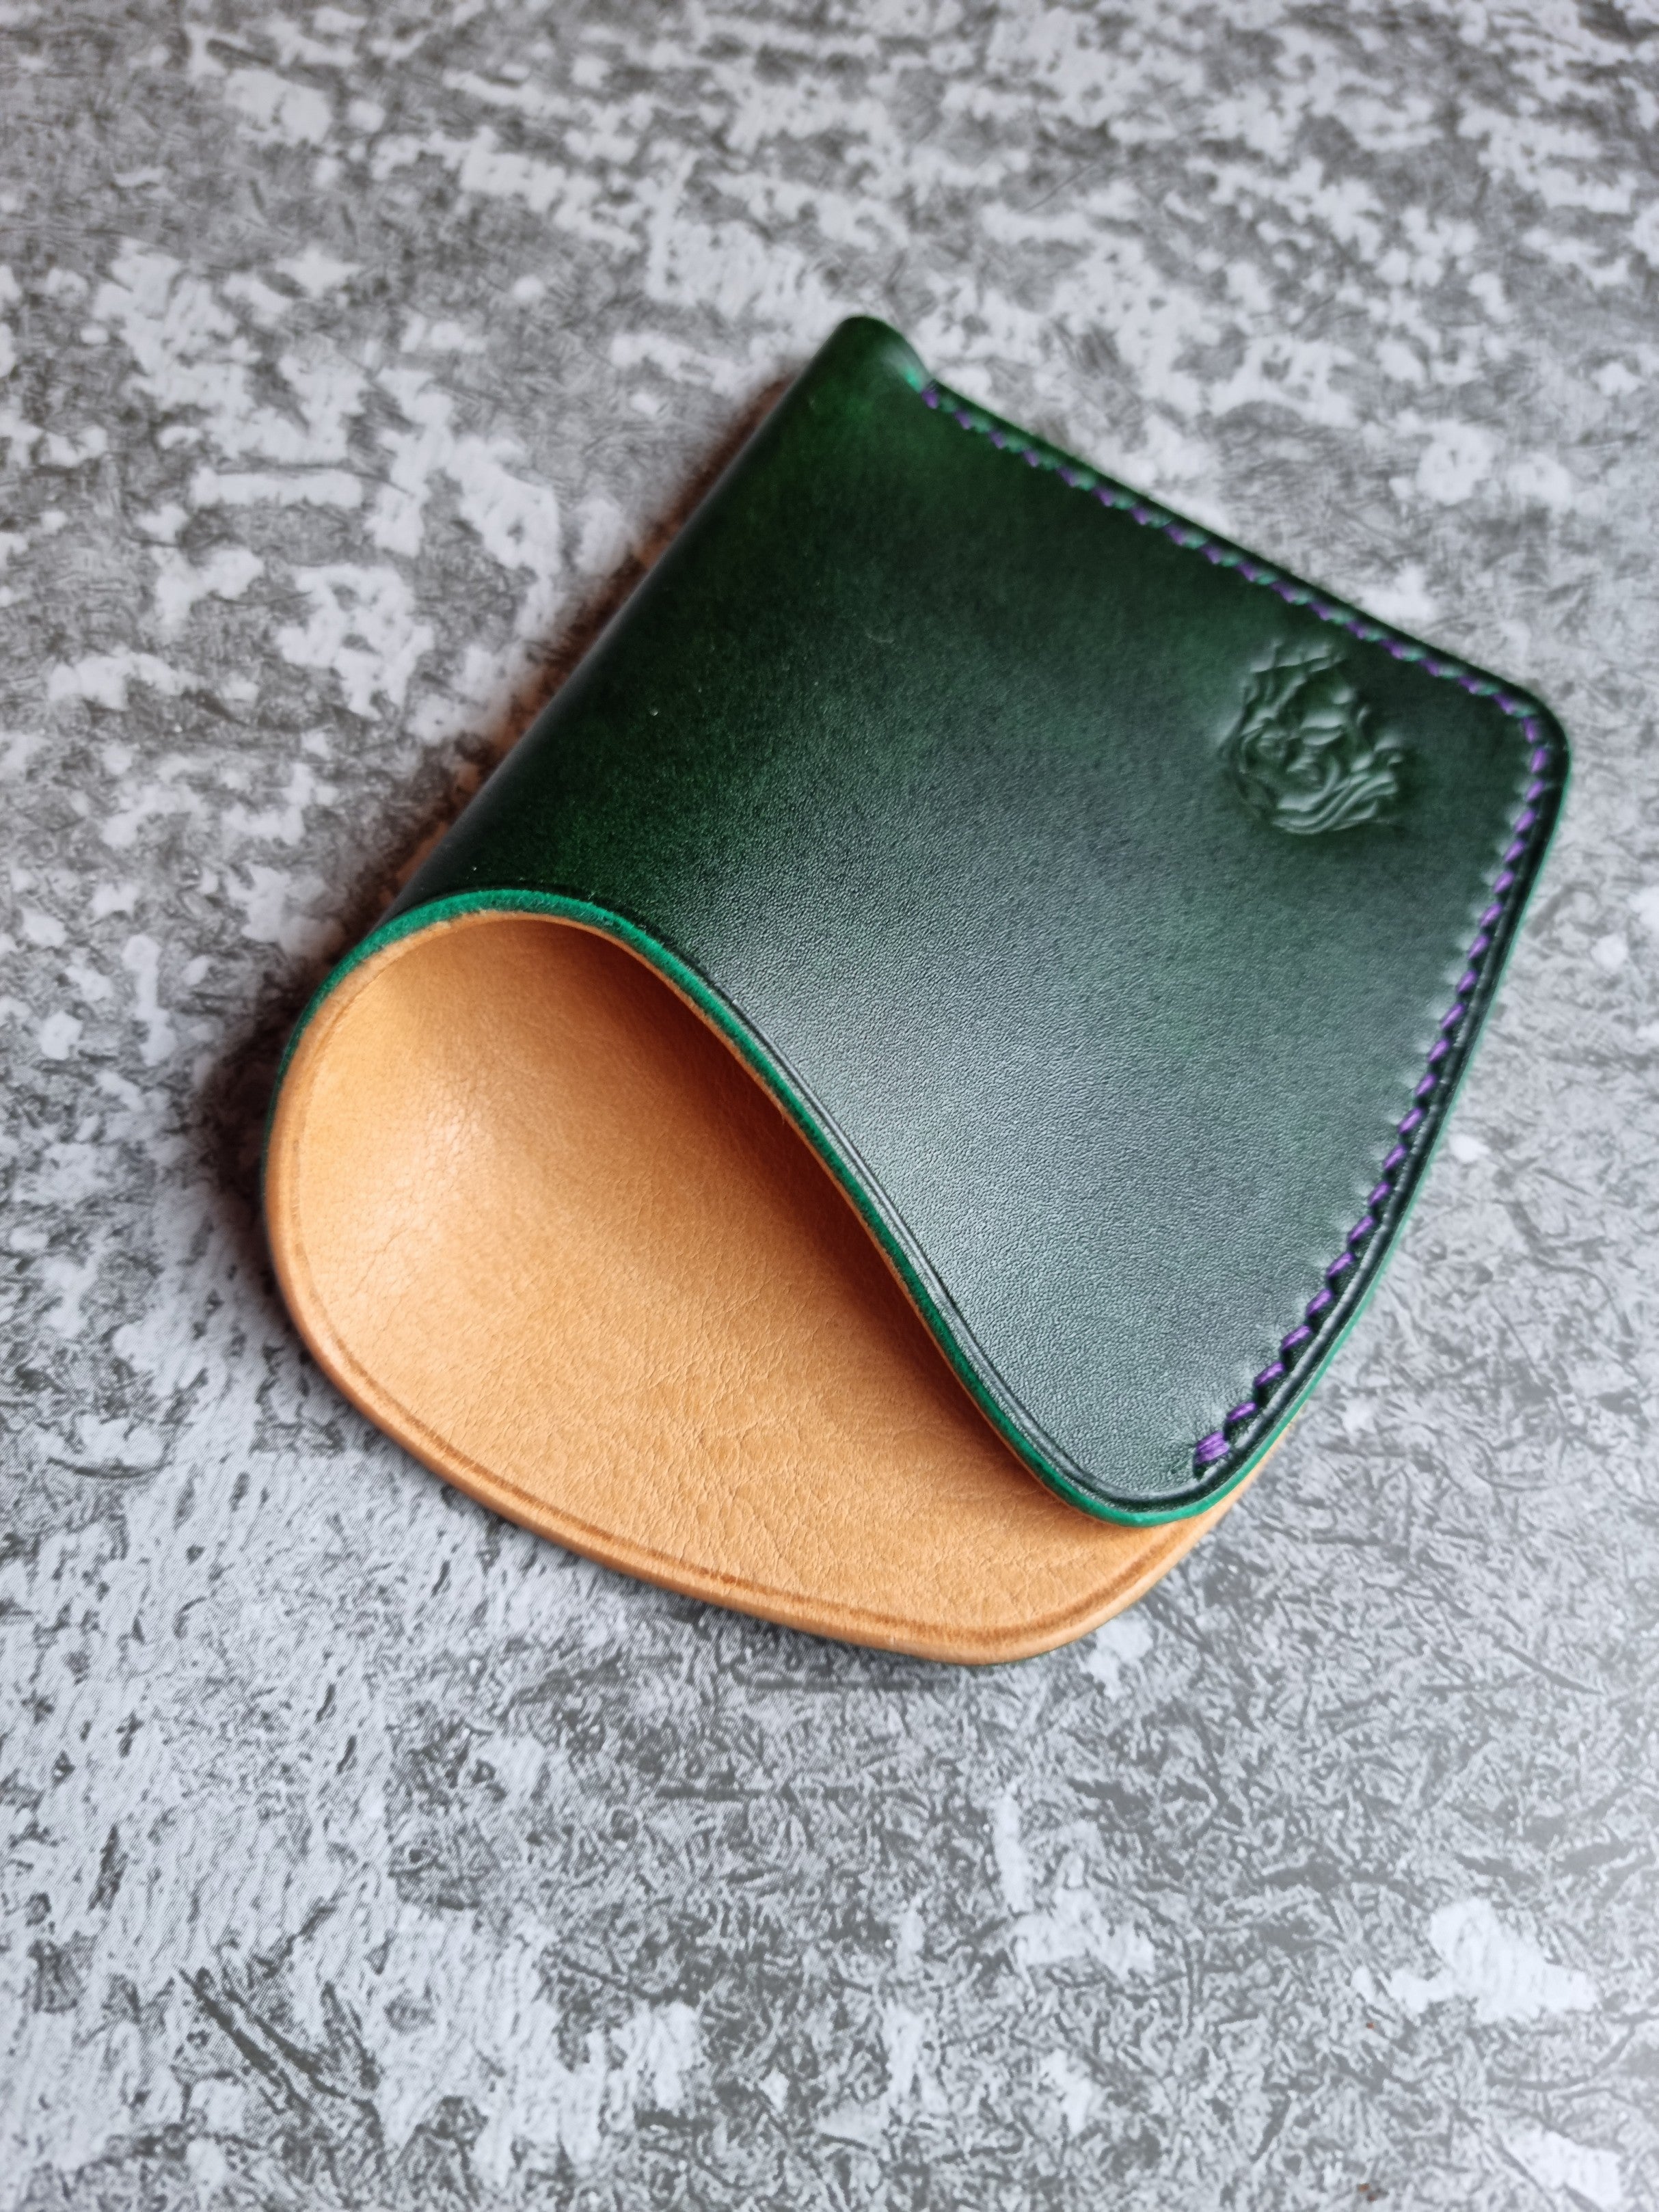 Taxi Wallet. Blue/Green Leather Folding Wallet- Coins, Cards and Bills. –  Alicia Klein - Taxi Wallet - OWLrecycled